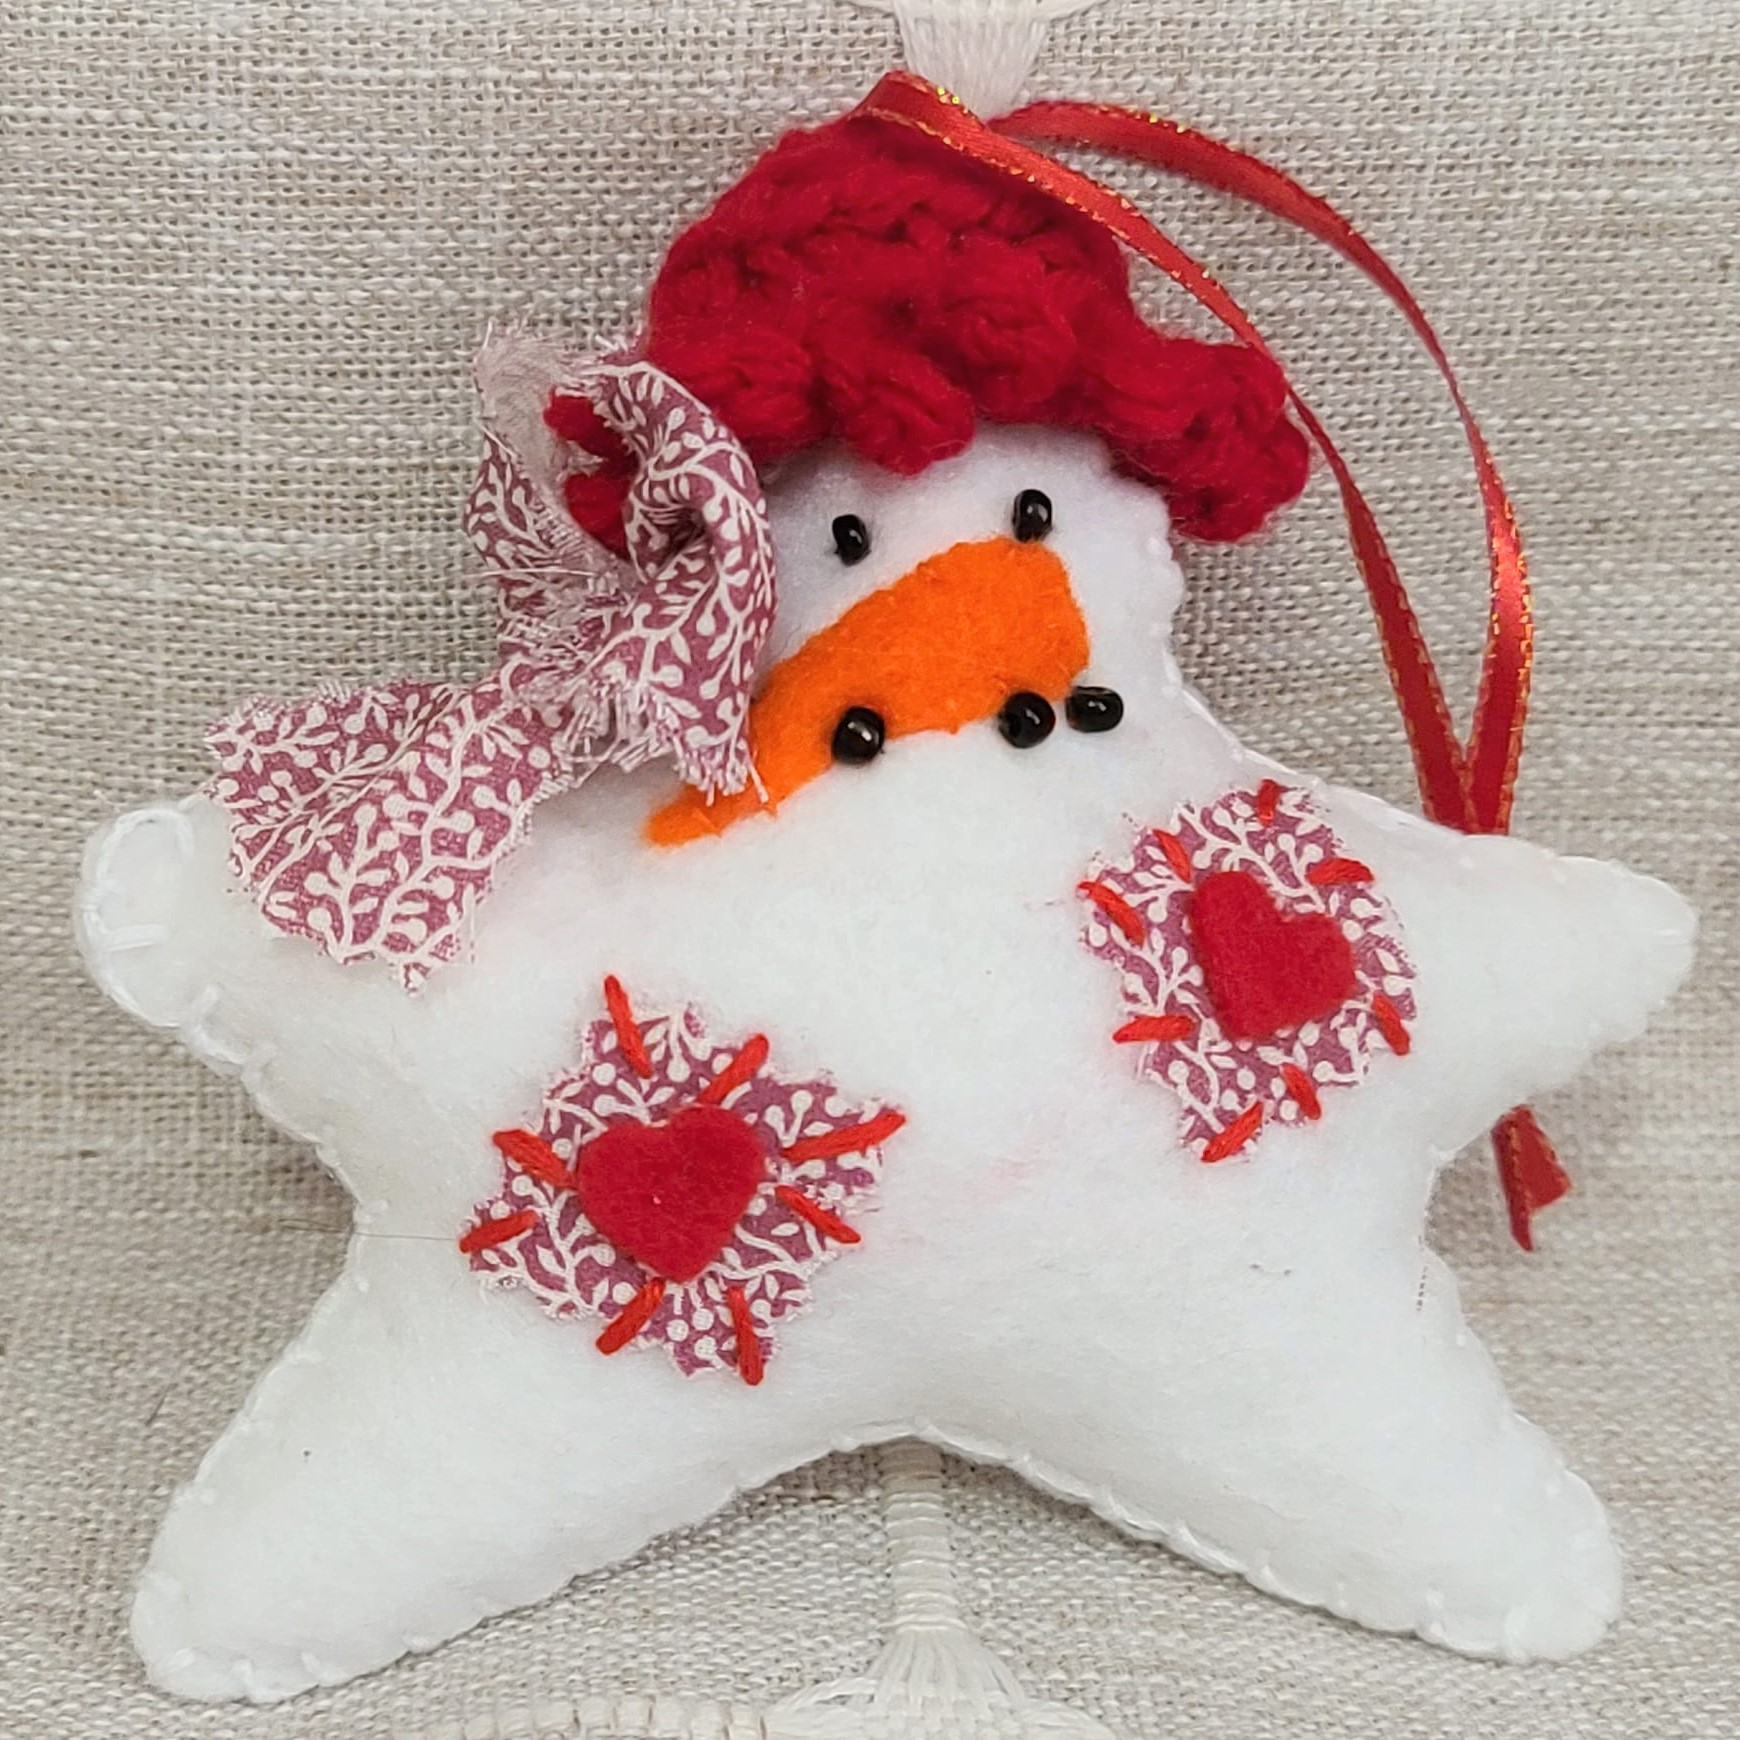 Felt Snowman star ornament with crochet hat -red patches and hat - Click Image to Close